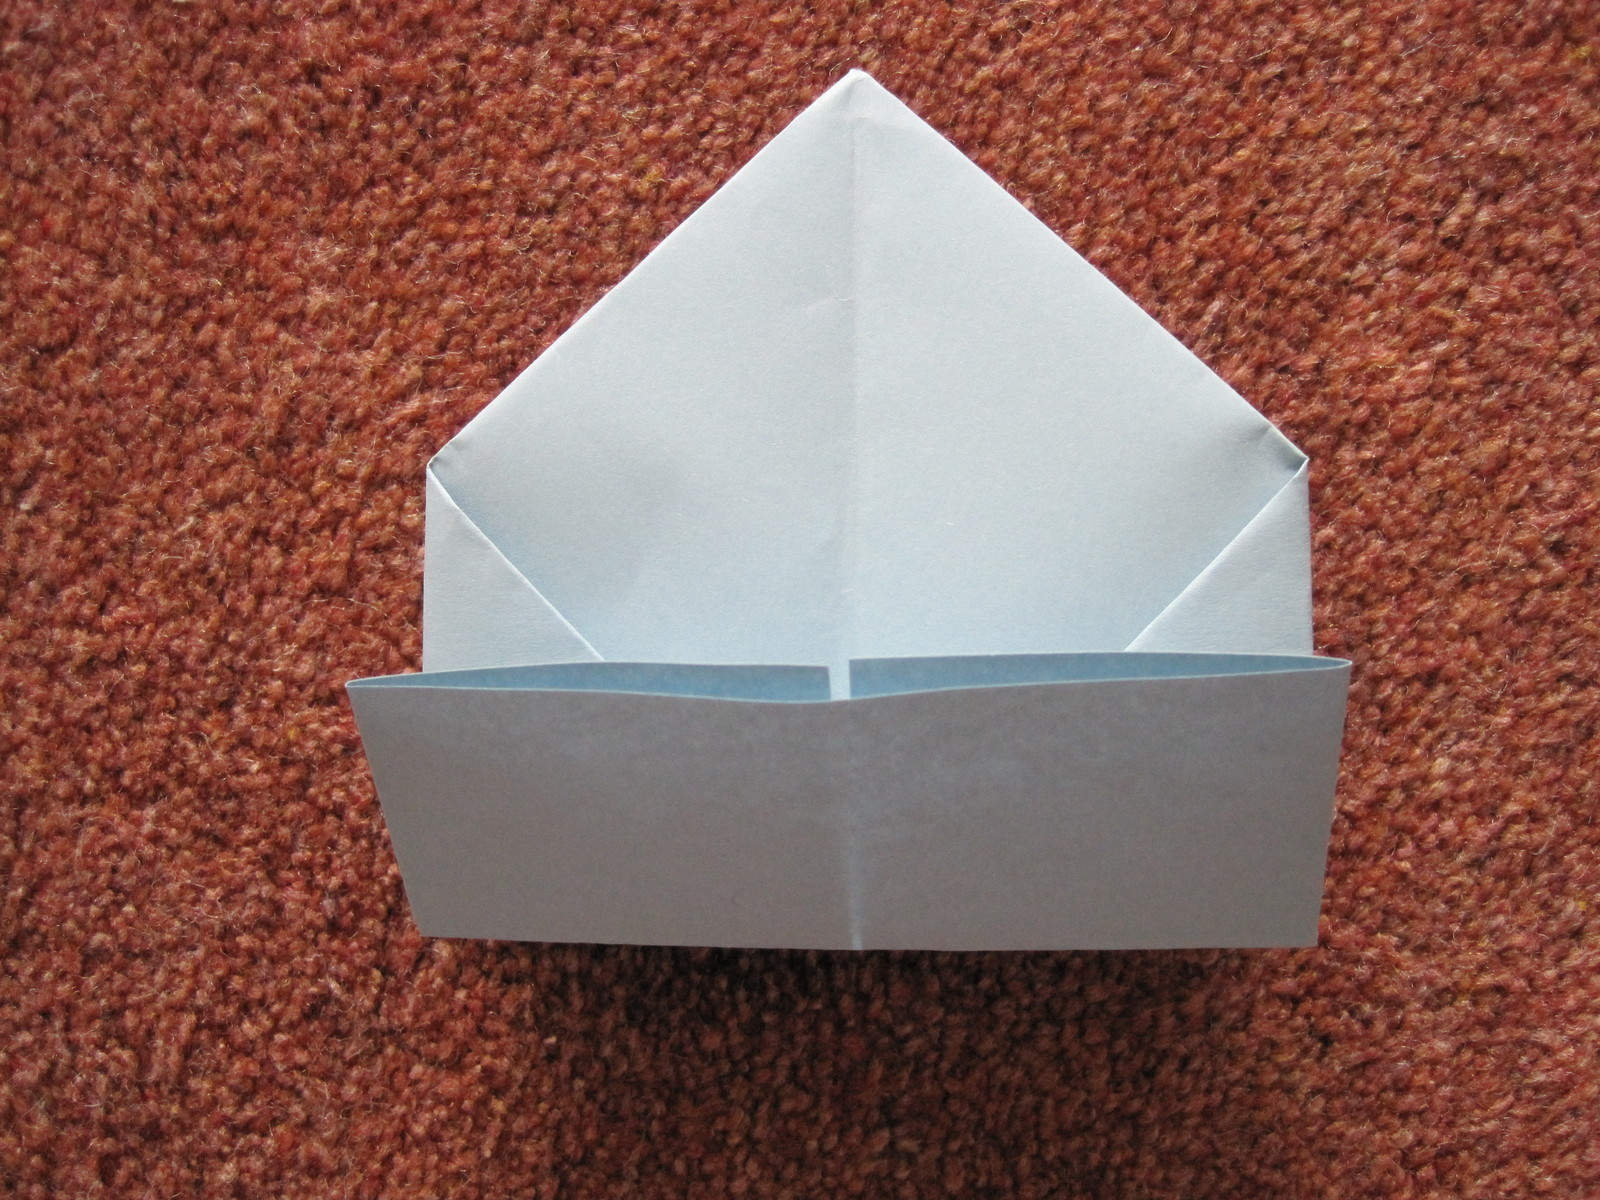 Origami Paper Box Quick Origami Disposable Trash Box How To Fold An Origami Box